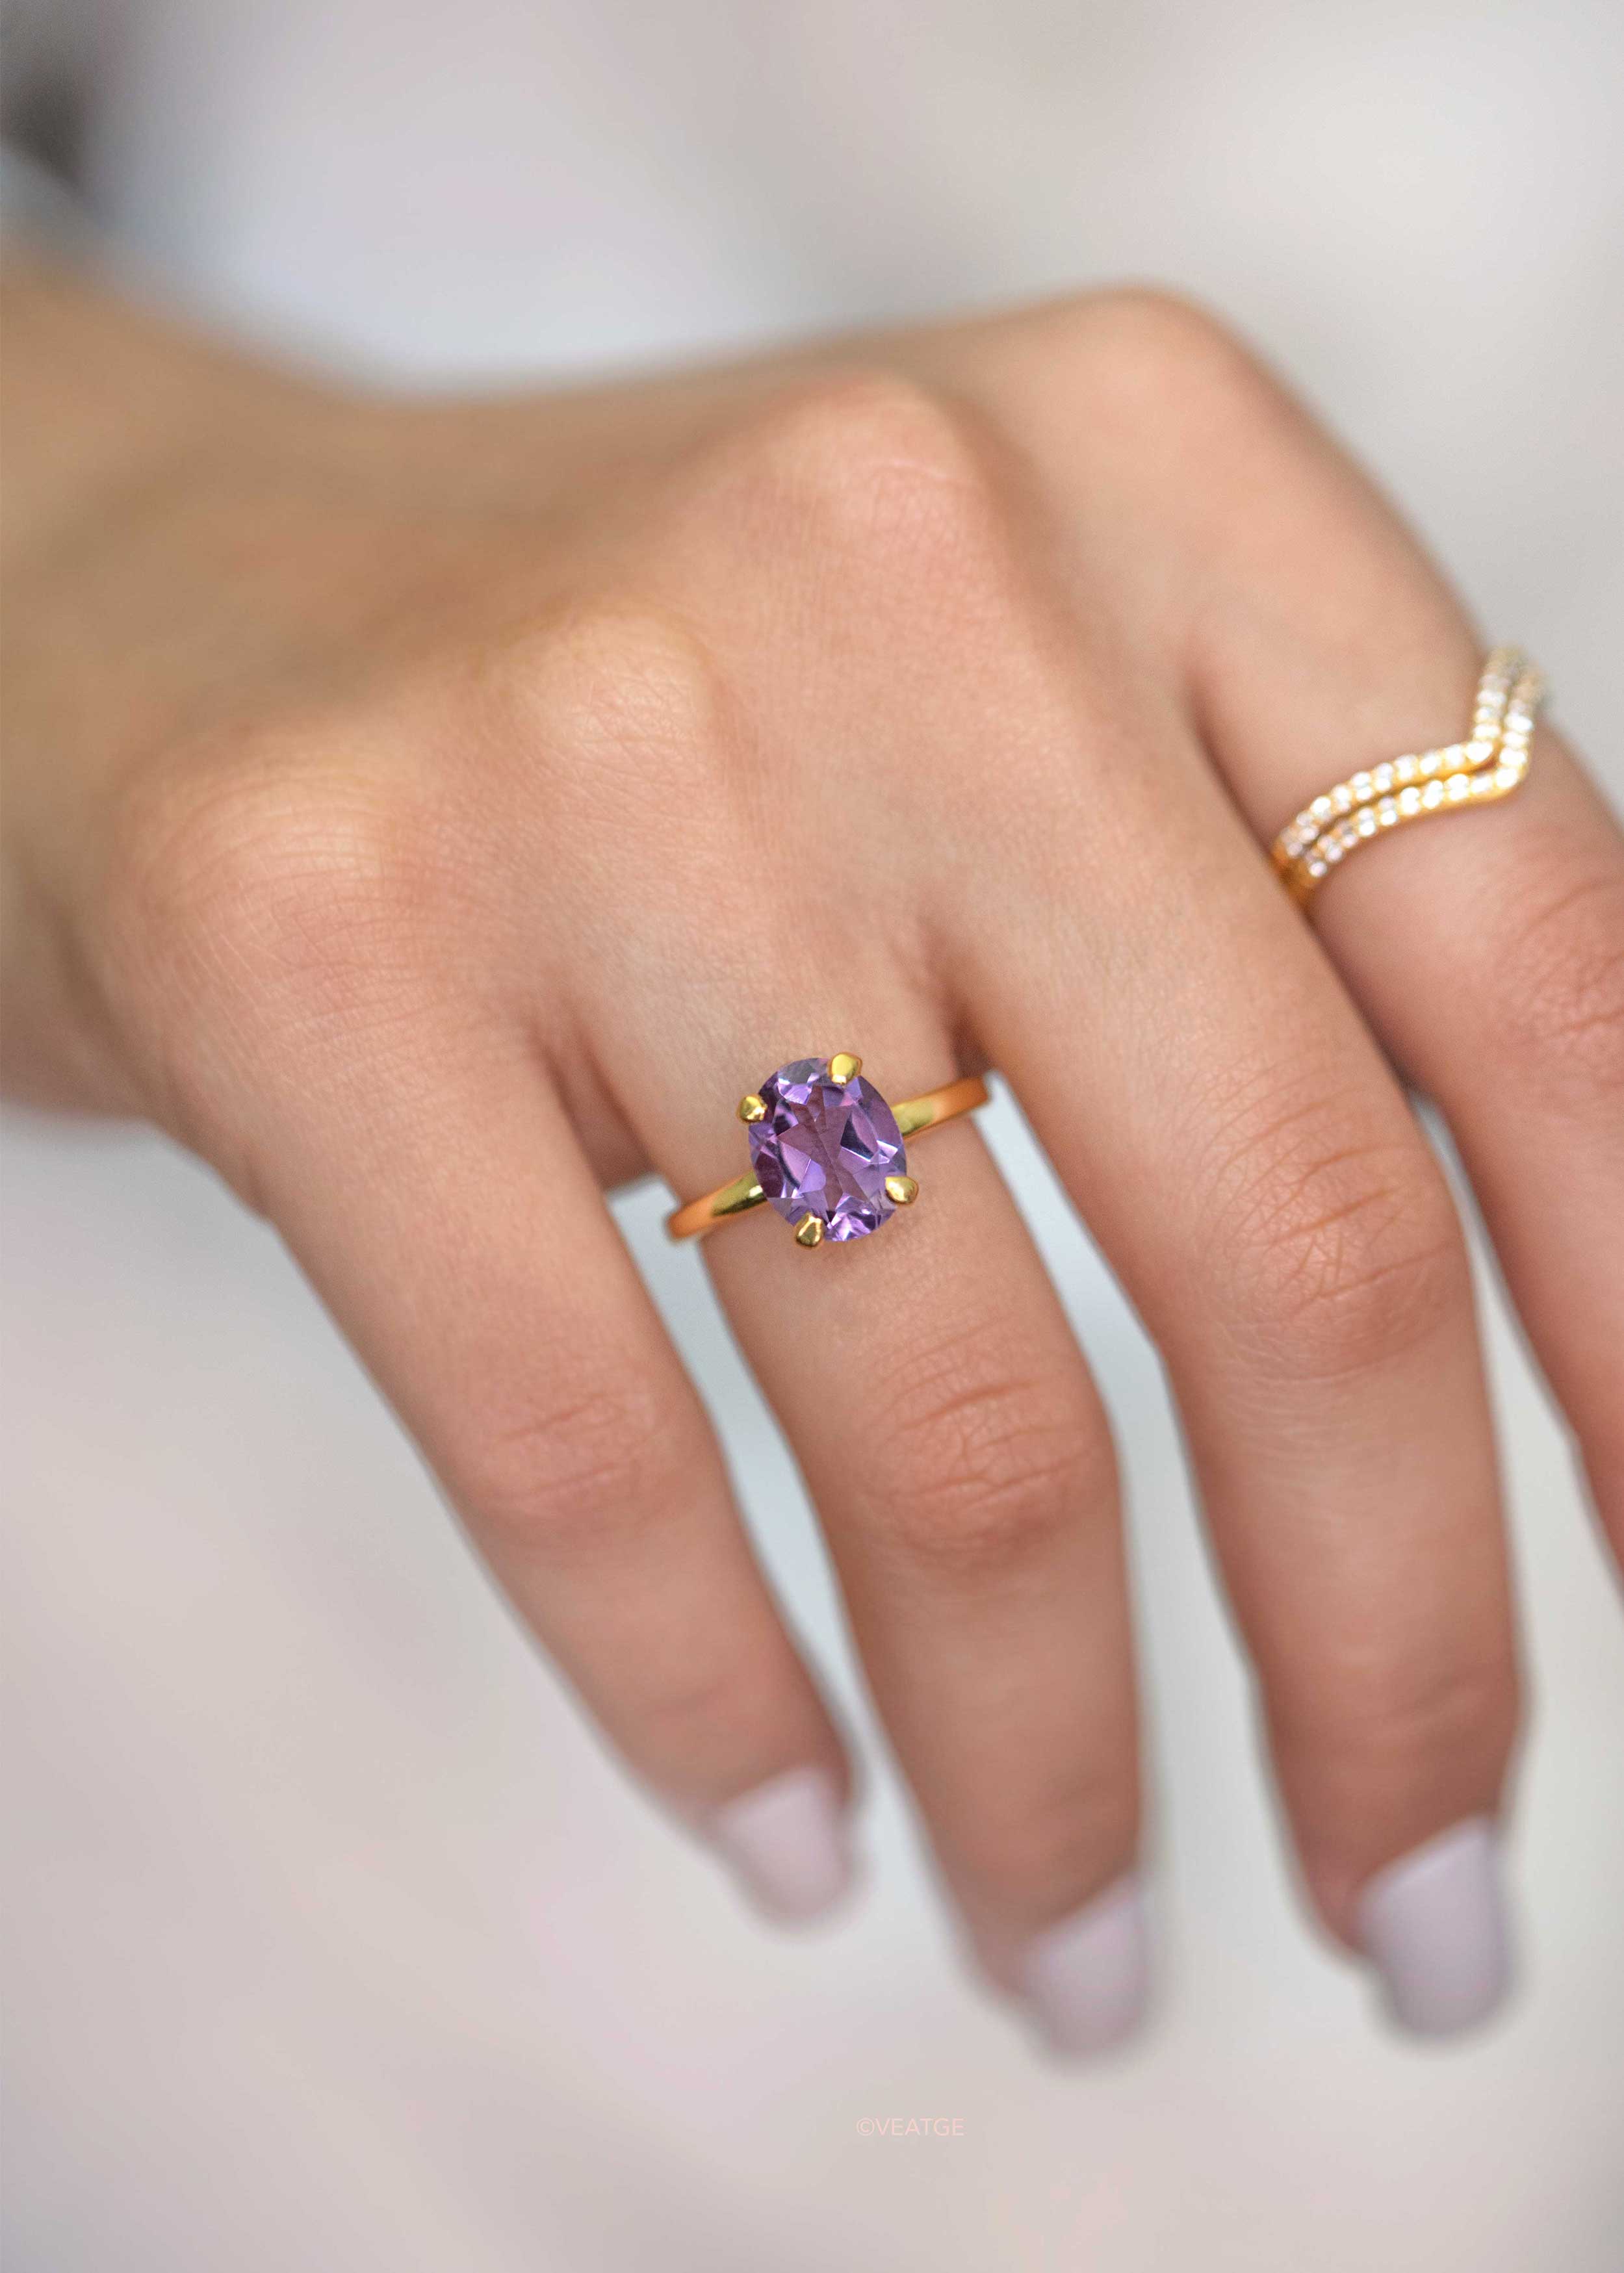 Large Amethyst Sterling Silver Gold Vermeil Ring, February Birthstone Gifts for Her